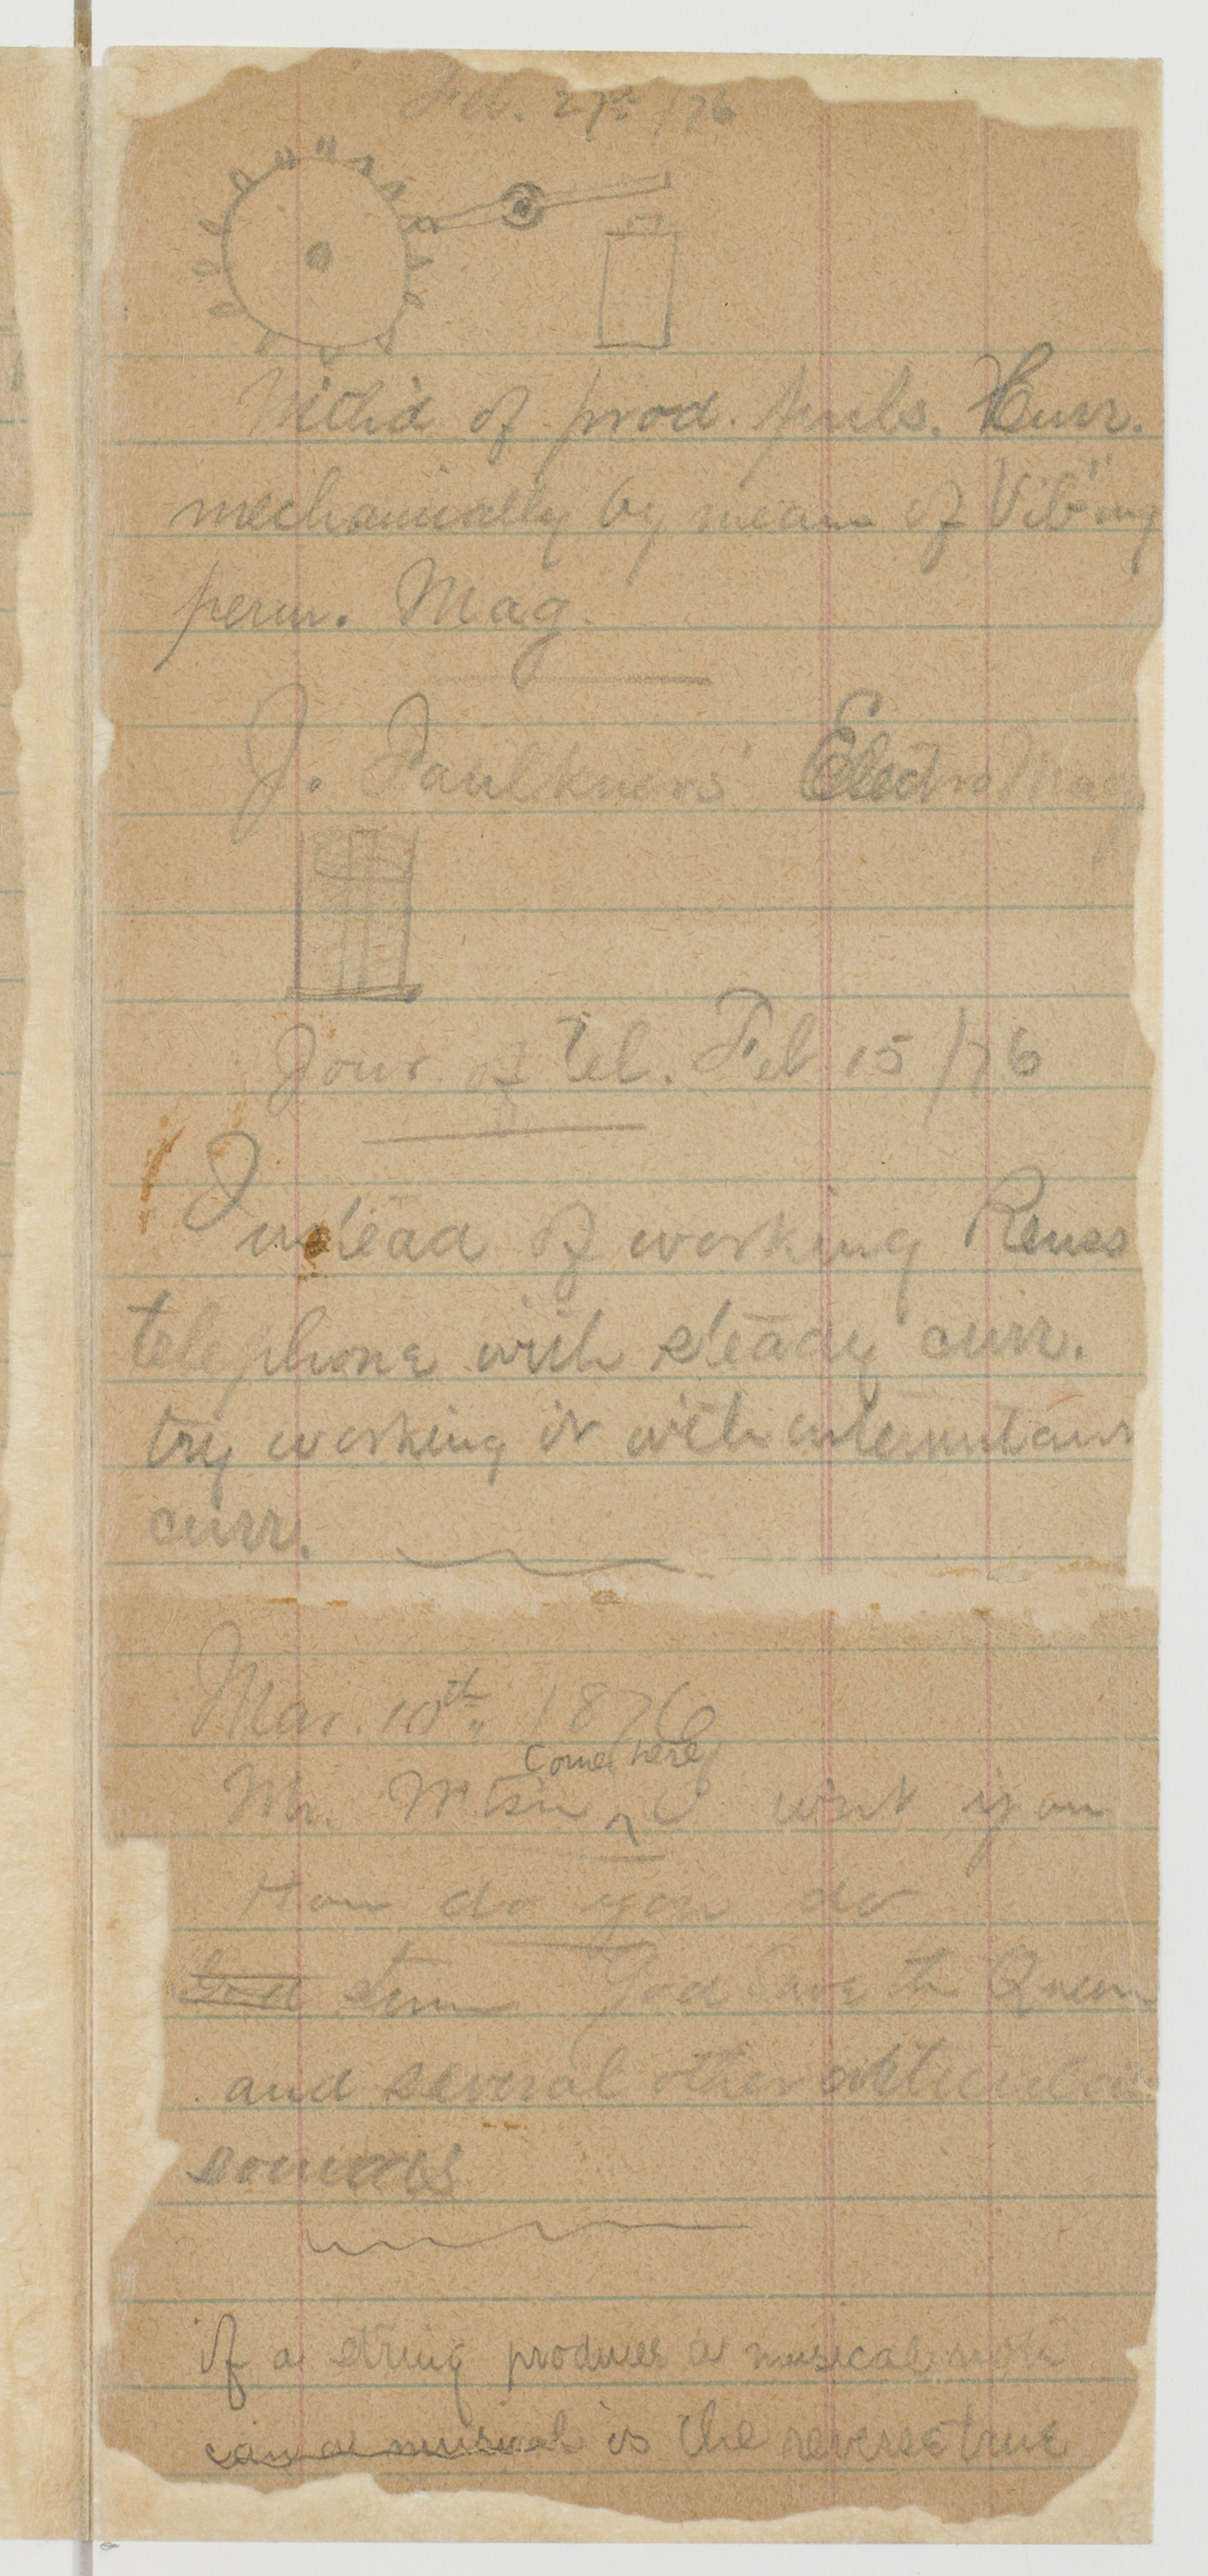 Thomas Watson’s notebook page recording the invention of telephone (March 10, 1876)